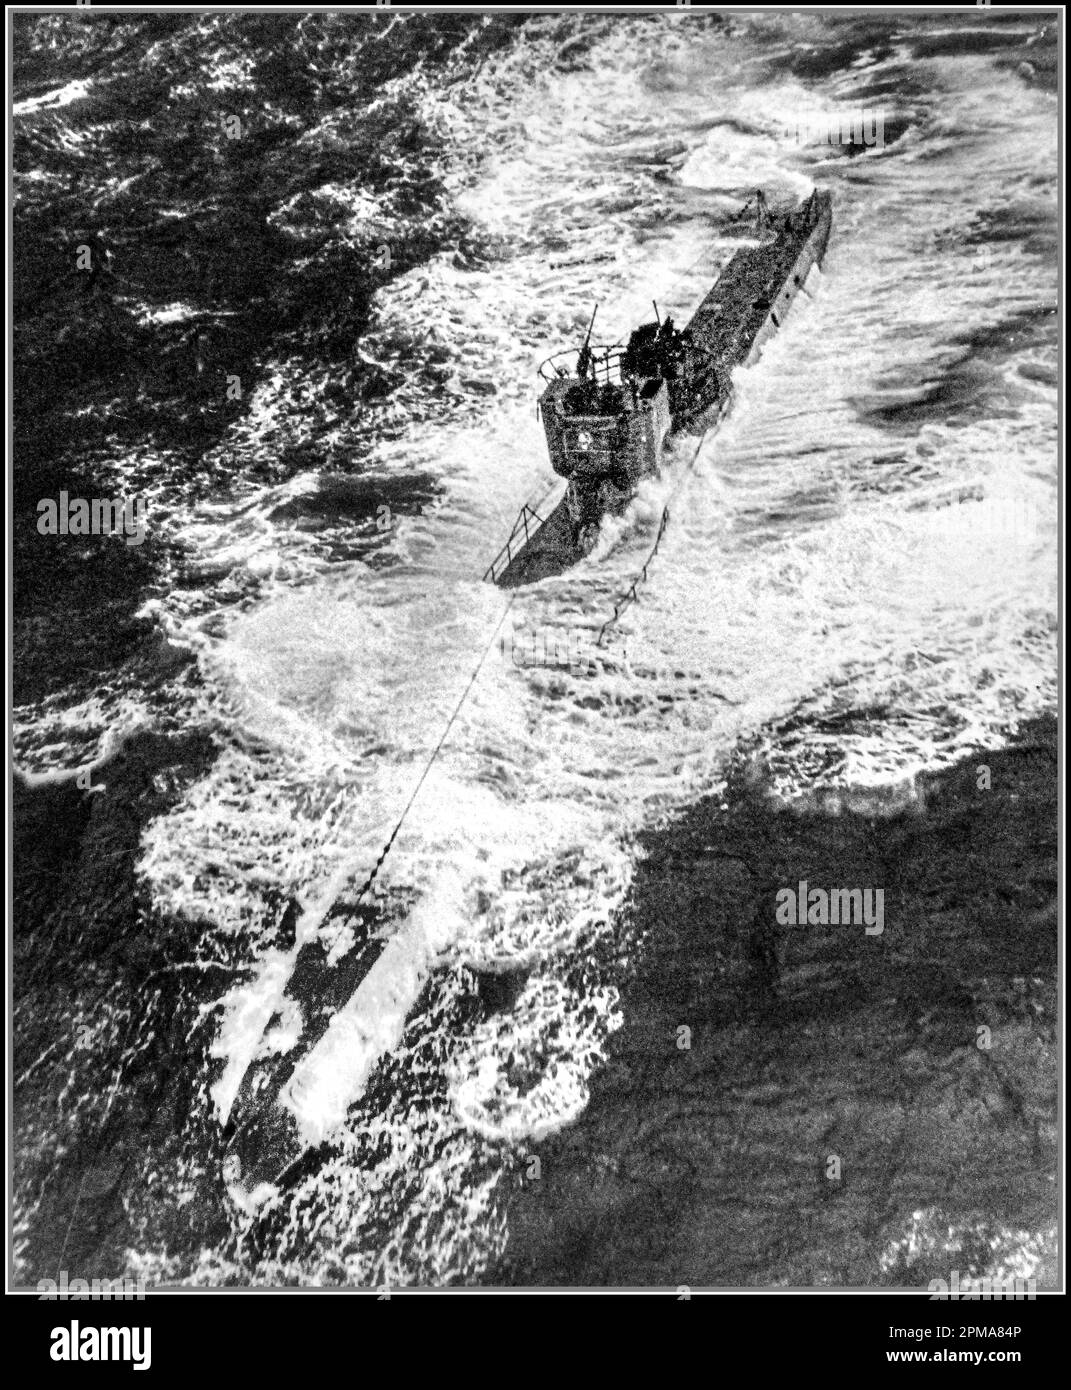 WW2 Attack on German U-boats, 1943. Aerial attack on U-378, Incident #4786, October 20, 1943. The U-boat was sunk by Fido homing torpedo and depth charges from Avenger and Wildcat aircraft from Composite Squadron Thirteen (VC-13) based on USS Core (CVE-13).World War II Second World War Mid-Atlantic Stock Photo